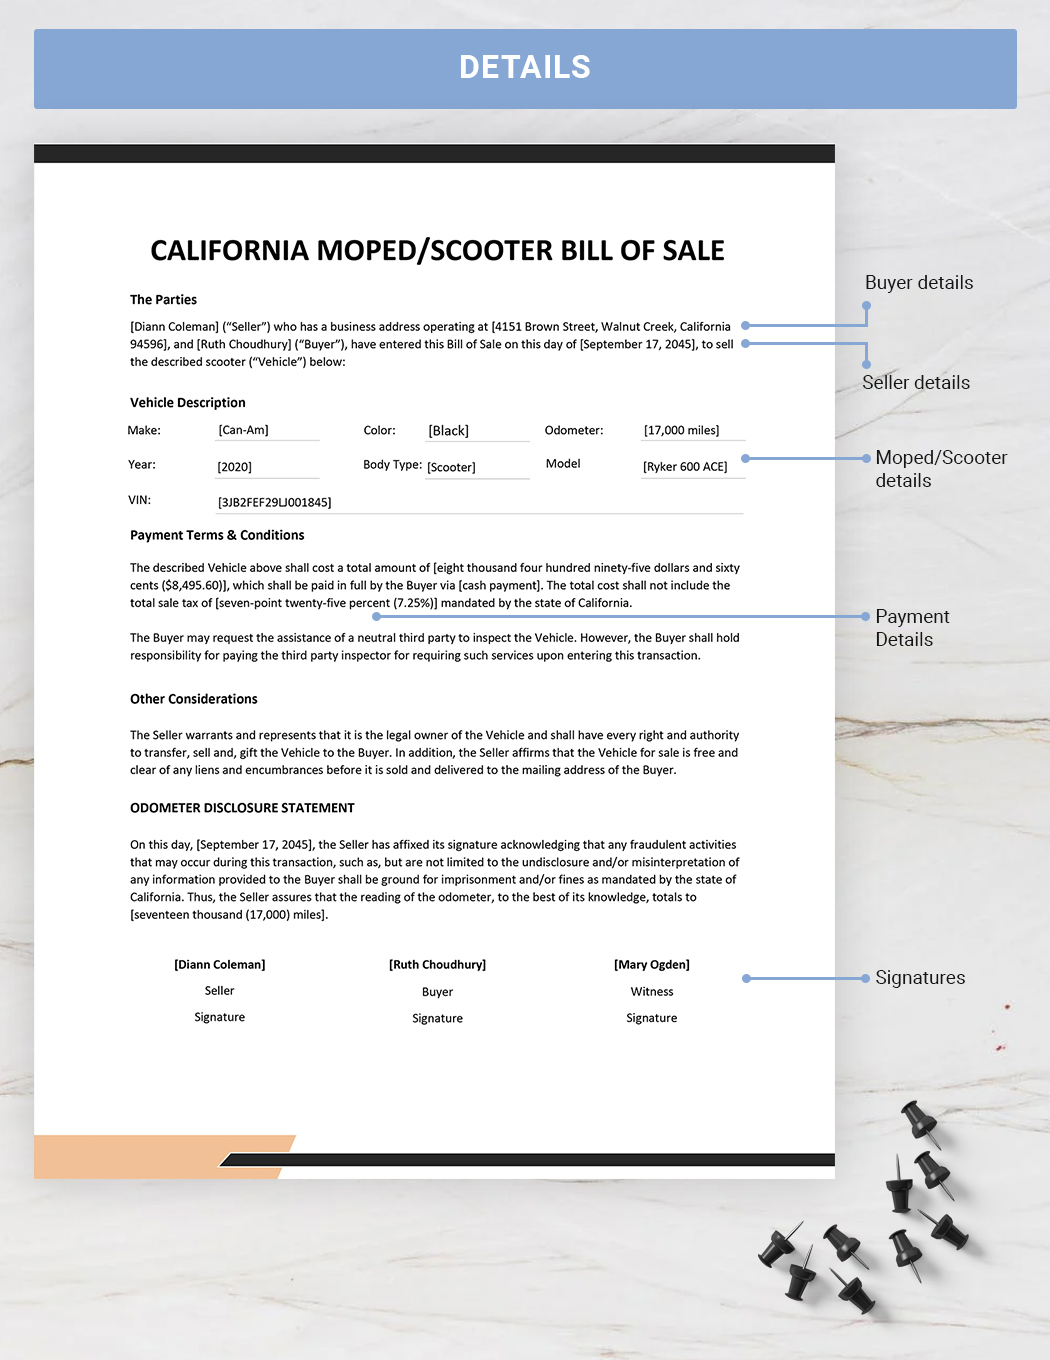 California Moped / Scooter Bill of Sale Template